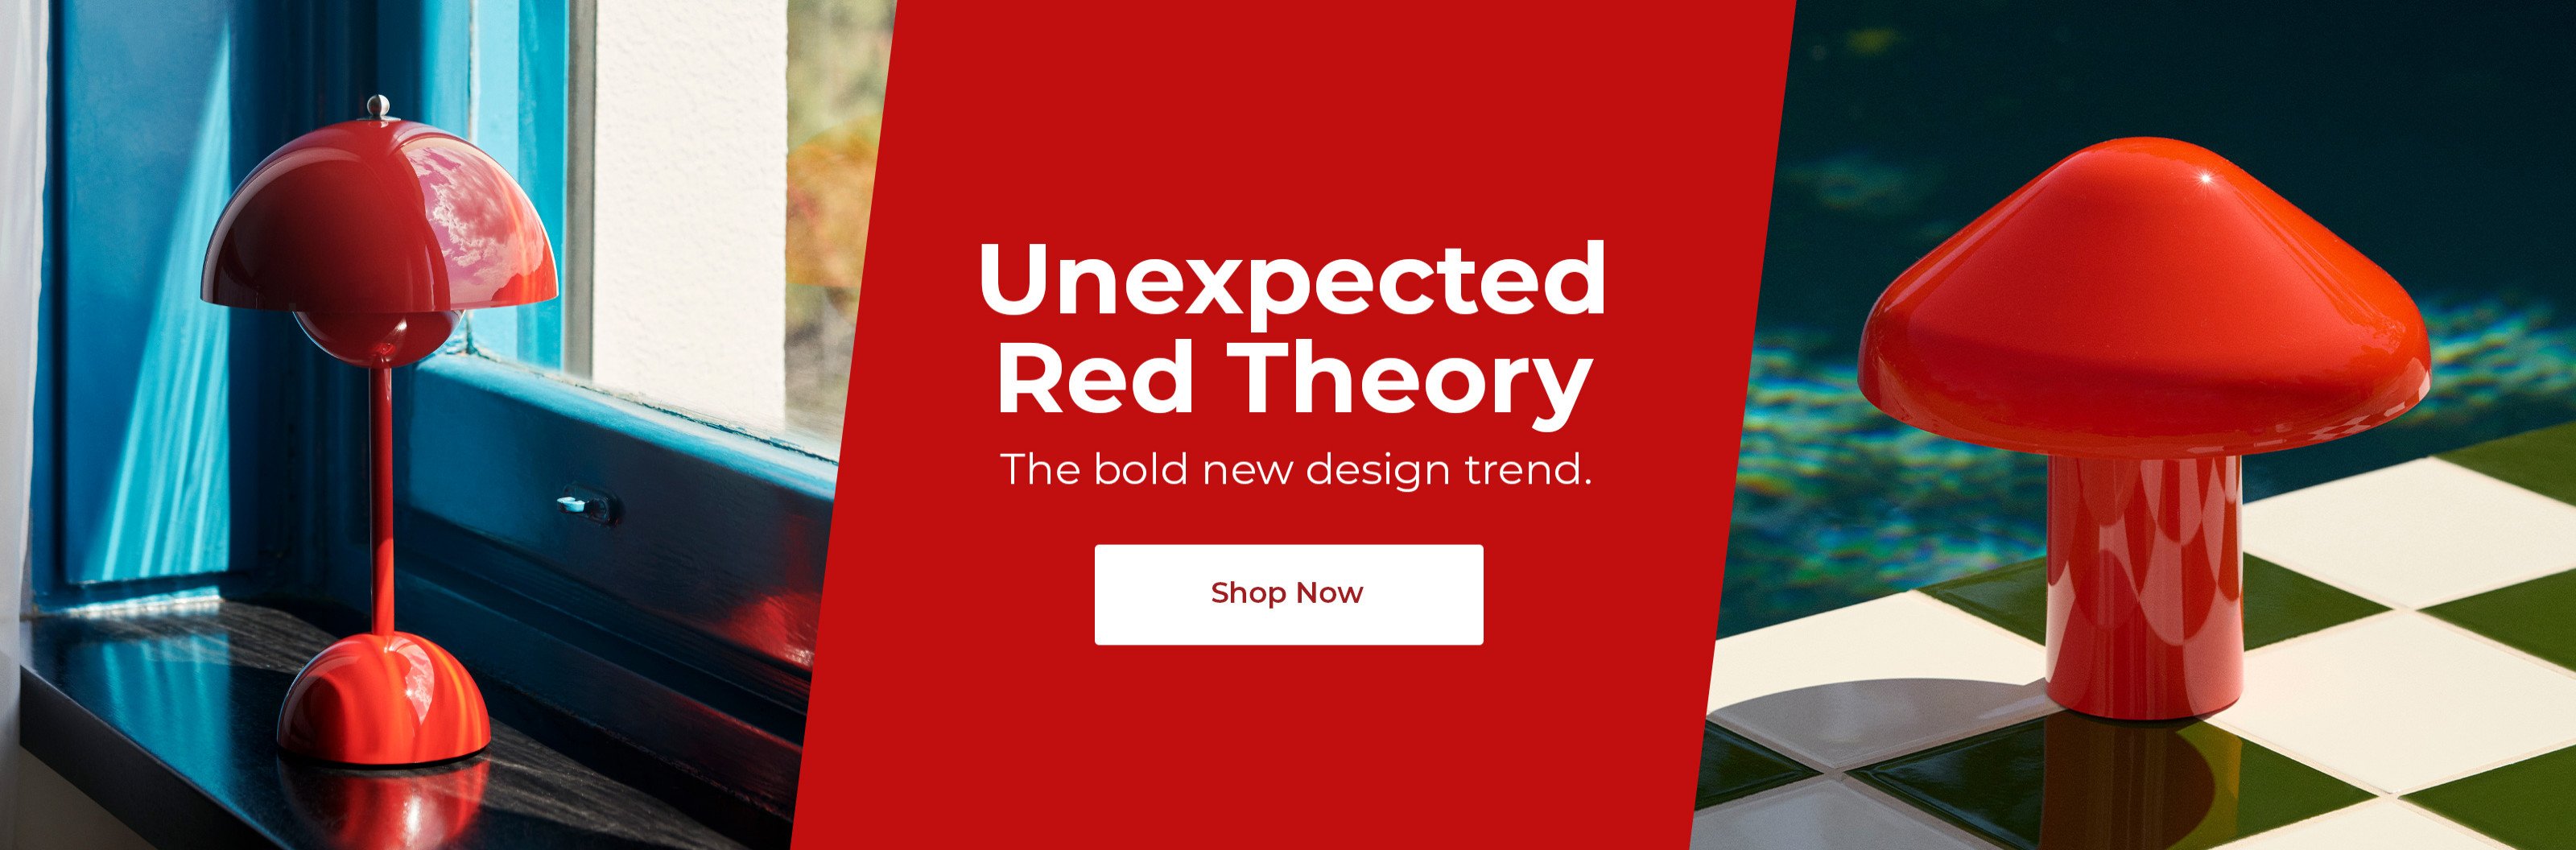 Unexpected Red Theory